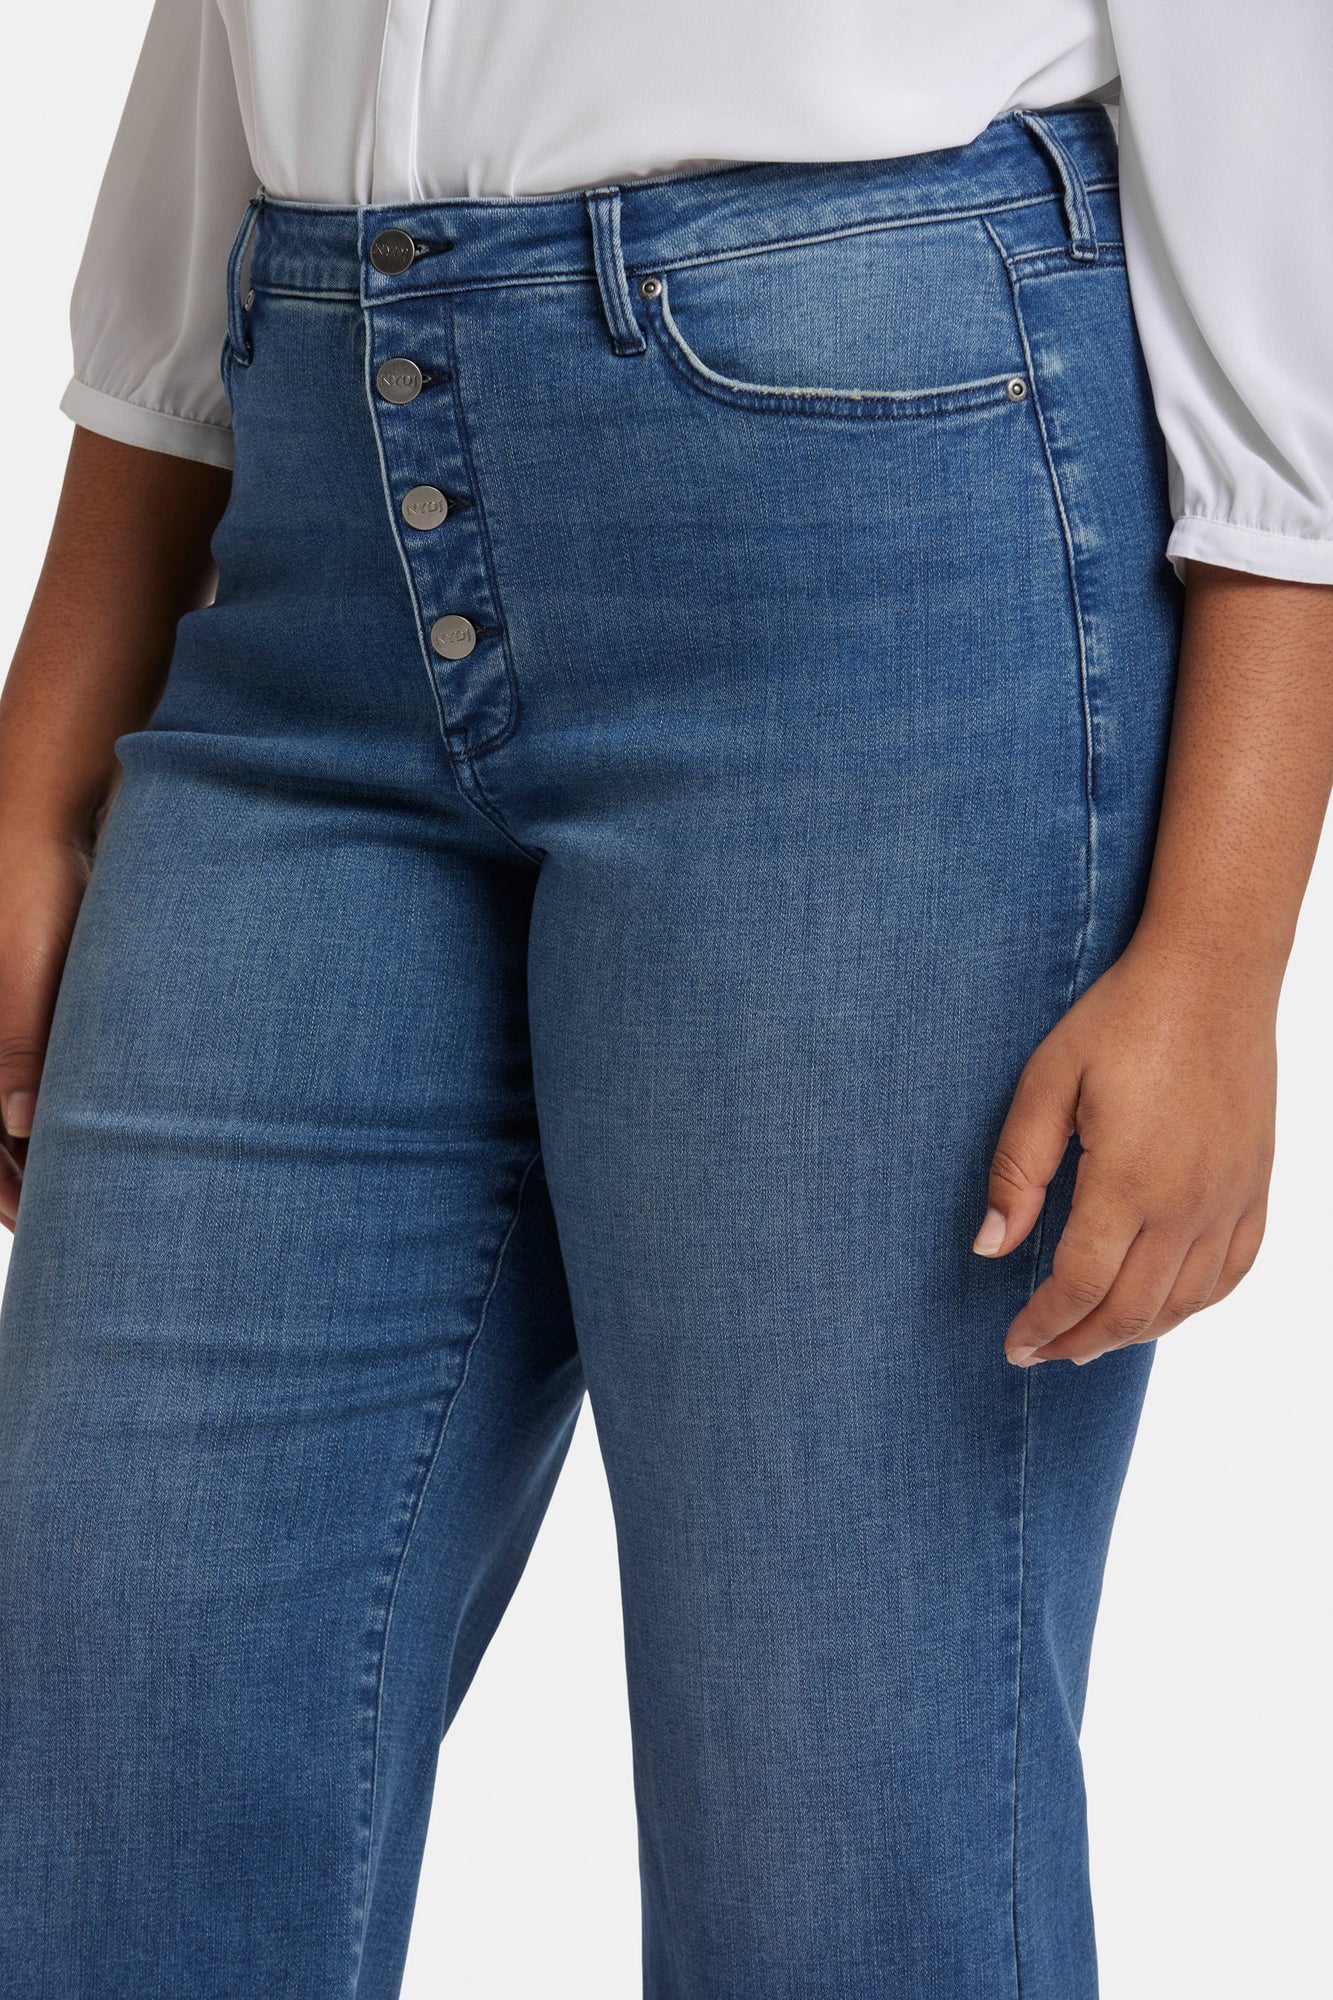 NYDJ Teresa Wide Leg Ankle Jeans In Plus Size With High Rise And Frayed Hems - Mission Blue